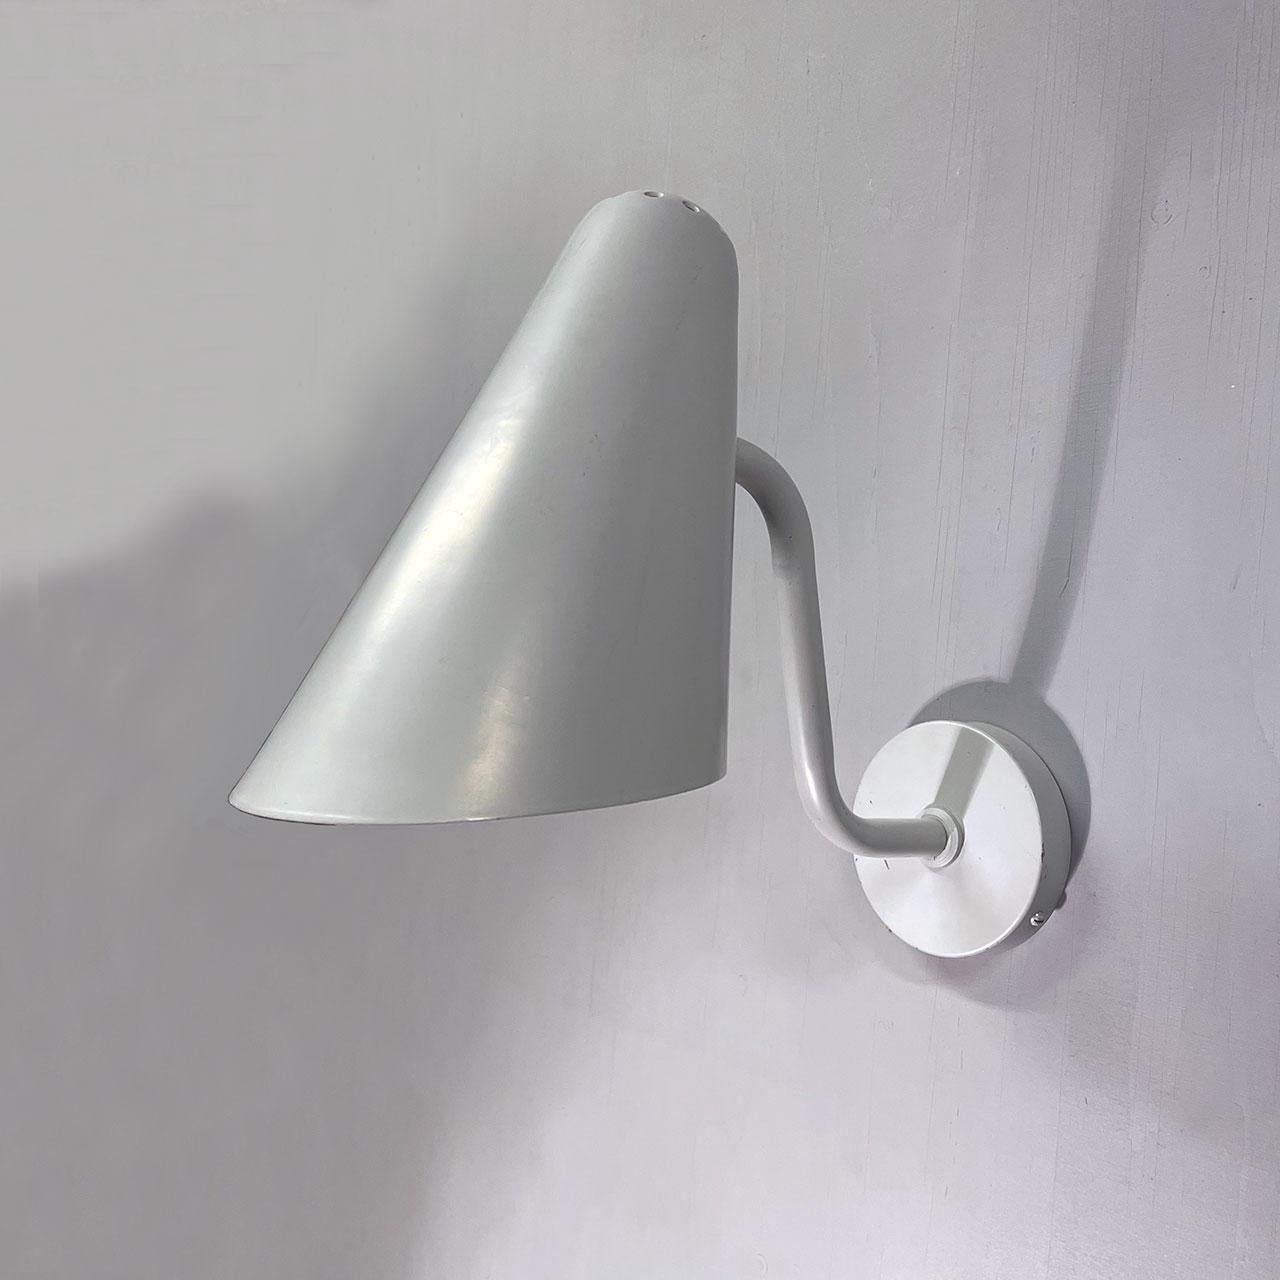 Wall lamp manufactured by Boréns at Borås in Sweden during the 1950s. Made from grey lacquered metal and aluminum. 